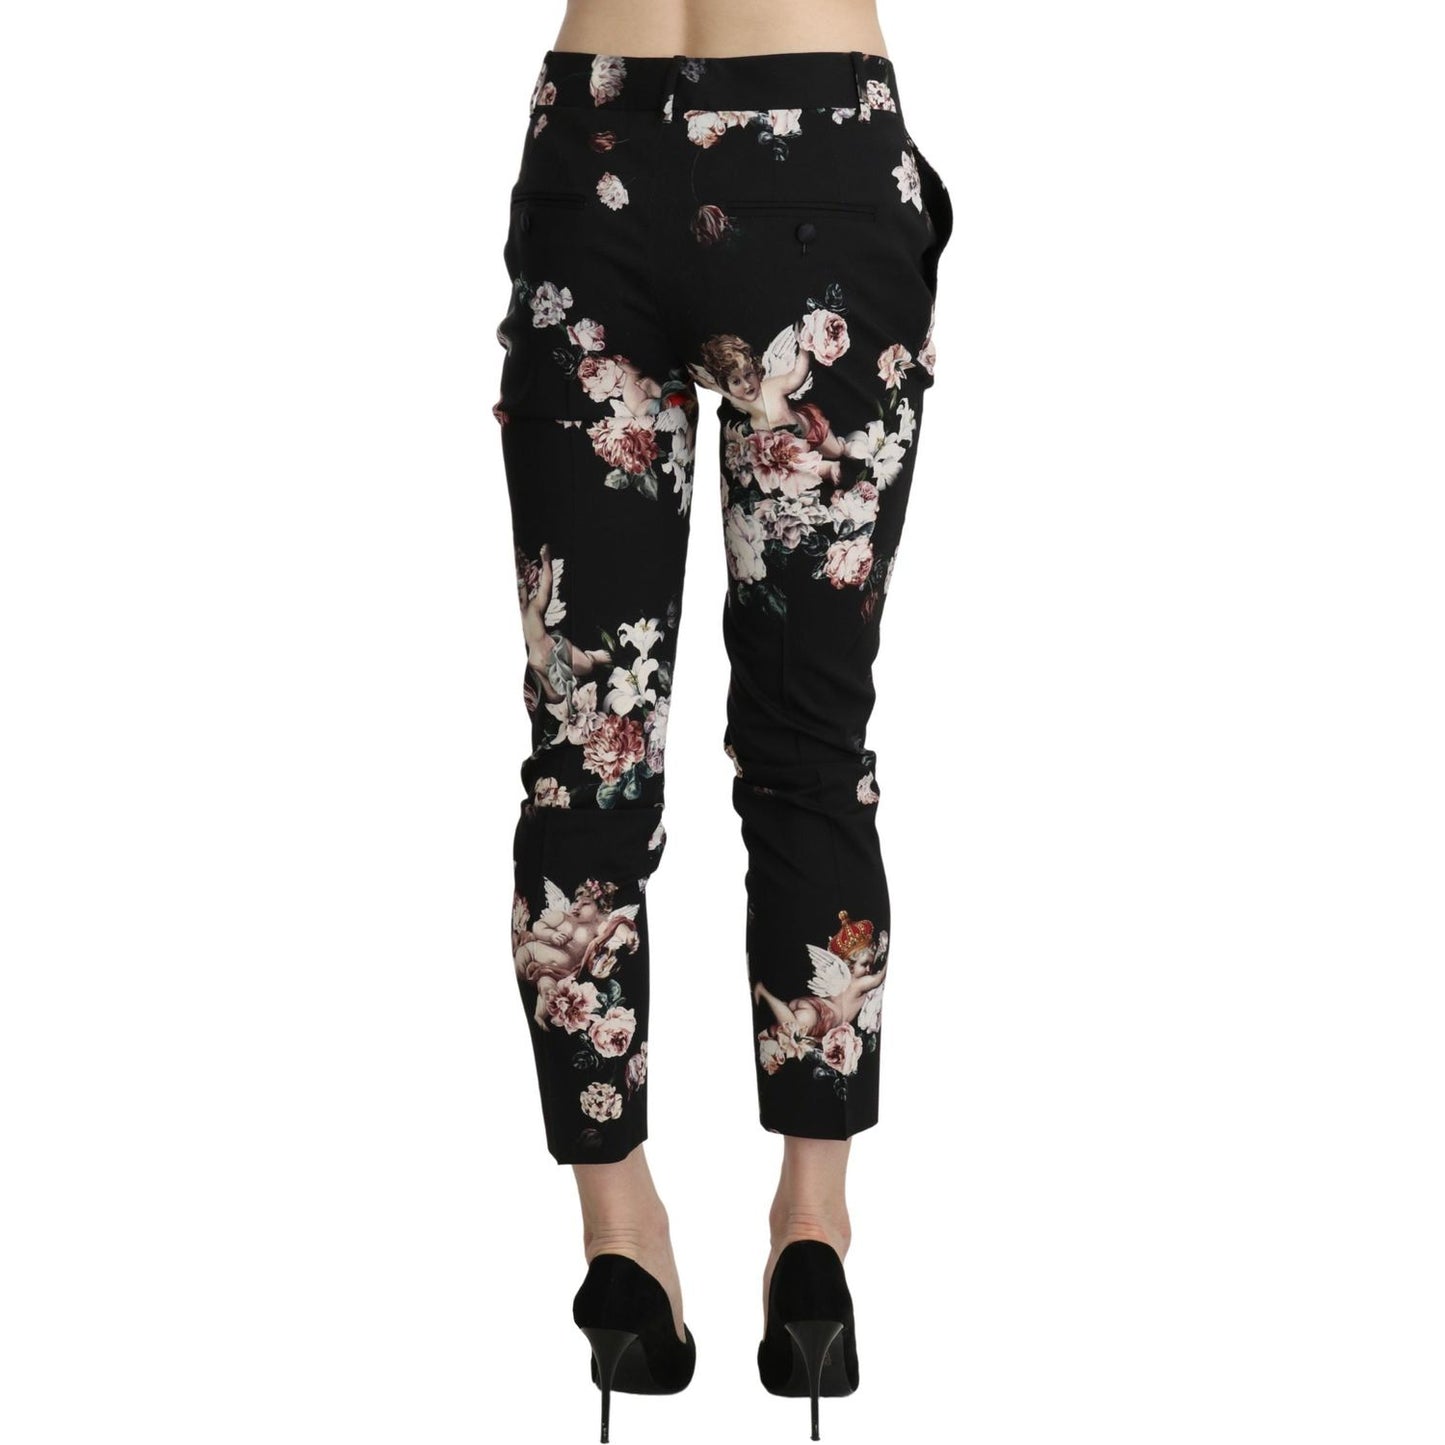 Dolce & Gabbana Elegant High Waist Cropped Trousers black-angel-floral-cropped-trouser-wool-pants Jeans & Pants IMG_0966-scaled-e579ef7d-cbe.jpg